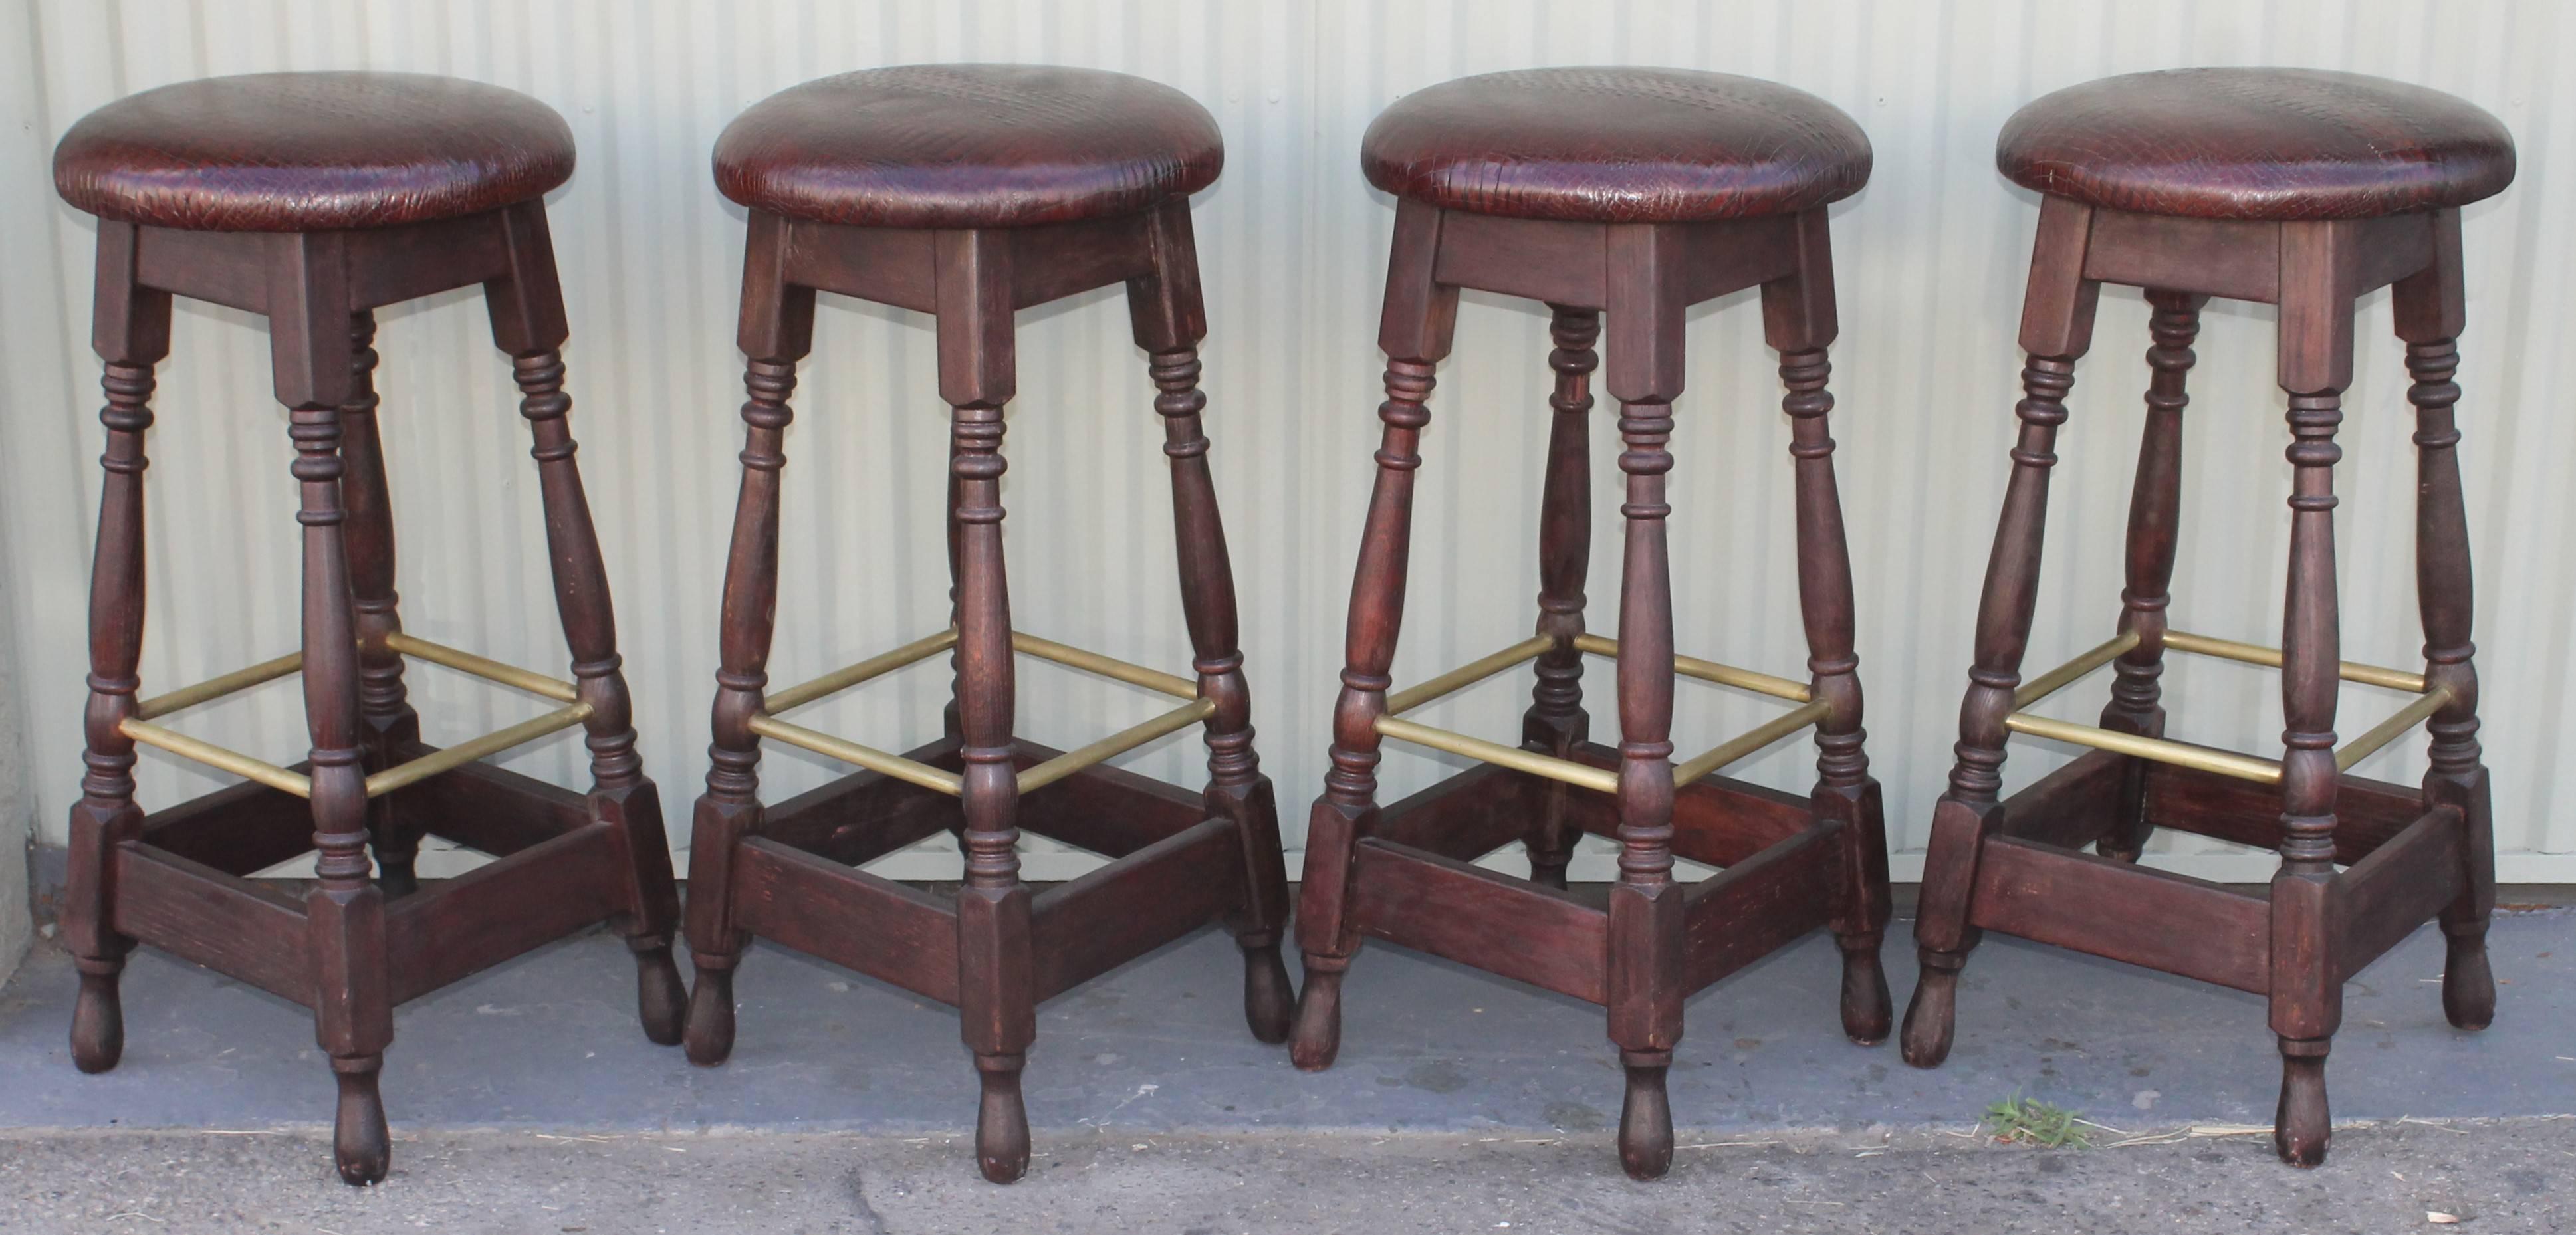 This set of four matching bar stools are in leather top seats and a turned leg base. The foot rests are in brass and are surround on all four sides. The newly done seats are in a reptile embossed texture. Fantastic condition and very comfortable.